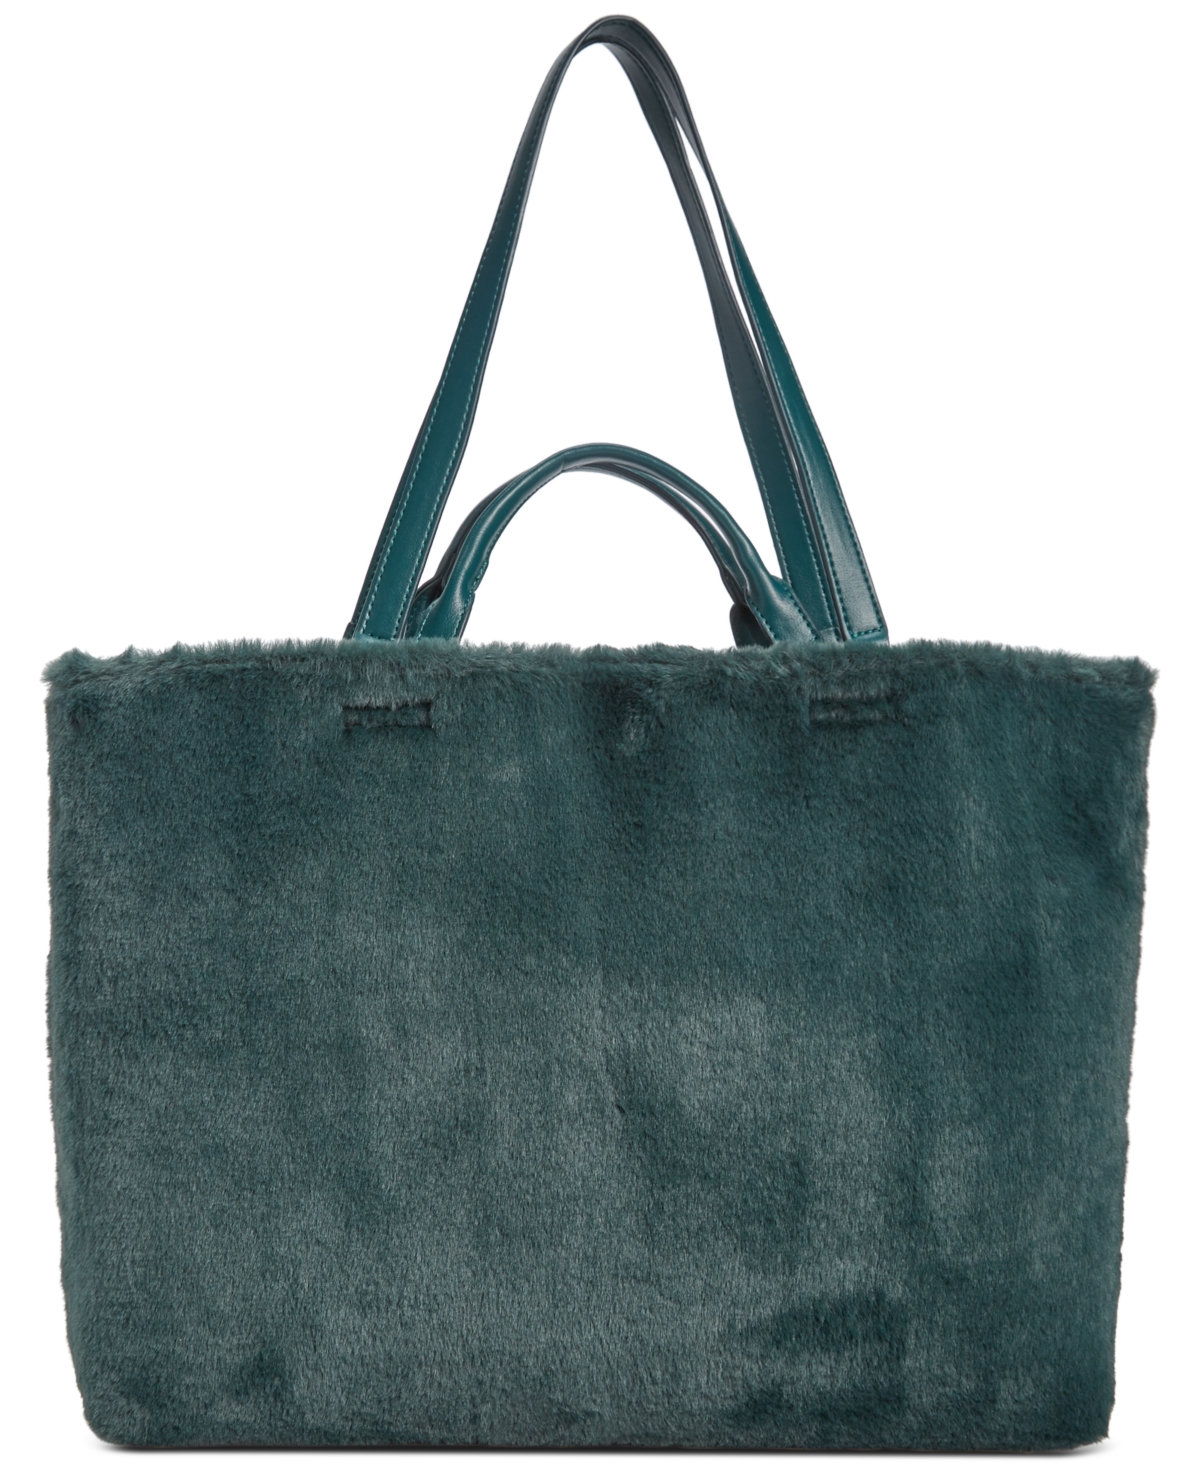 Leightonne Extra-Large Tote, Created for Macy's - Dark Forest